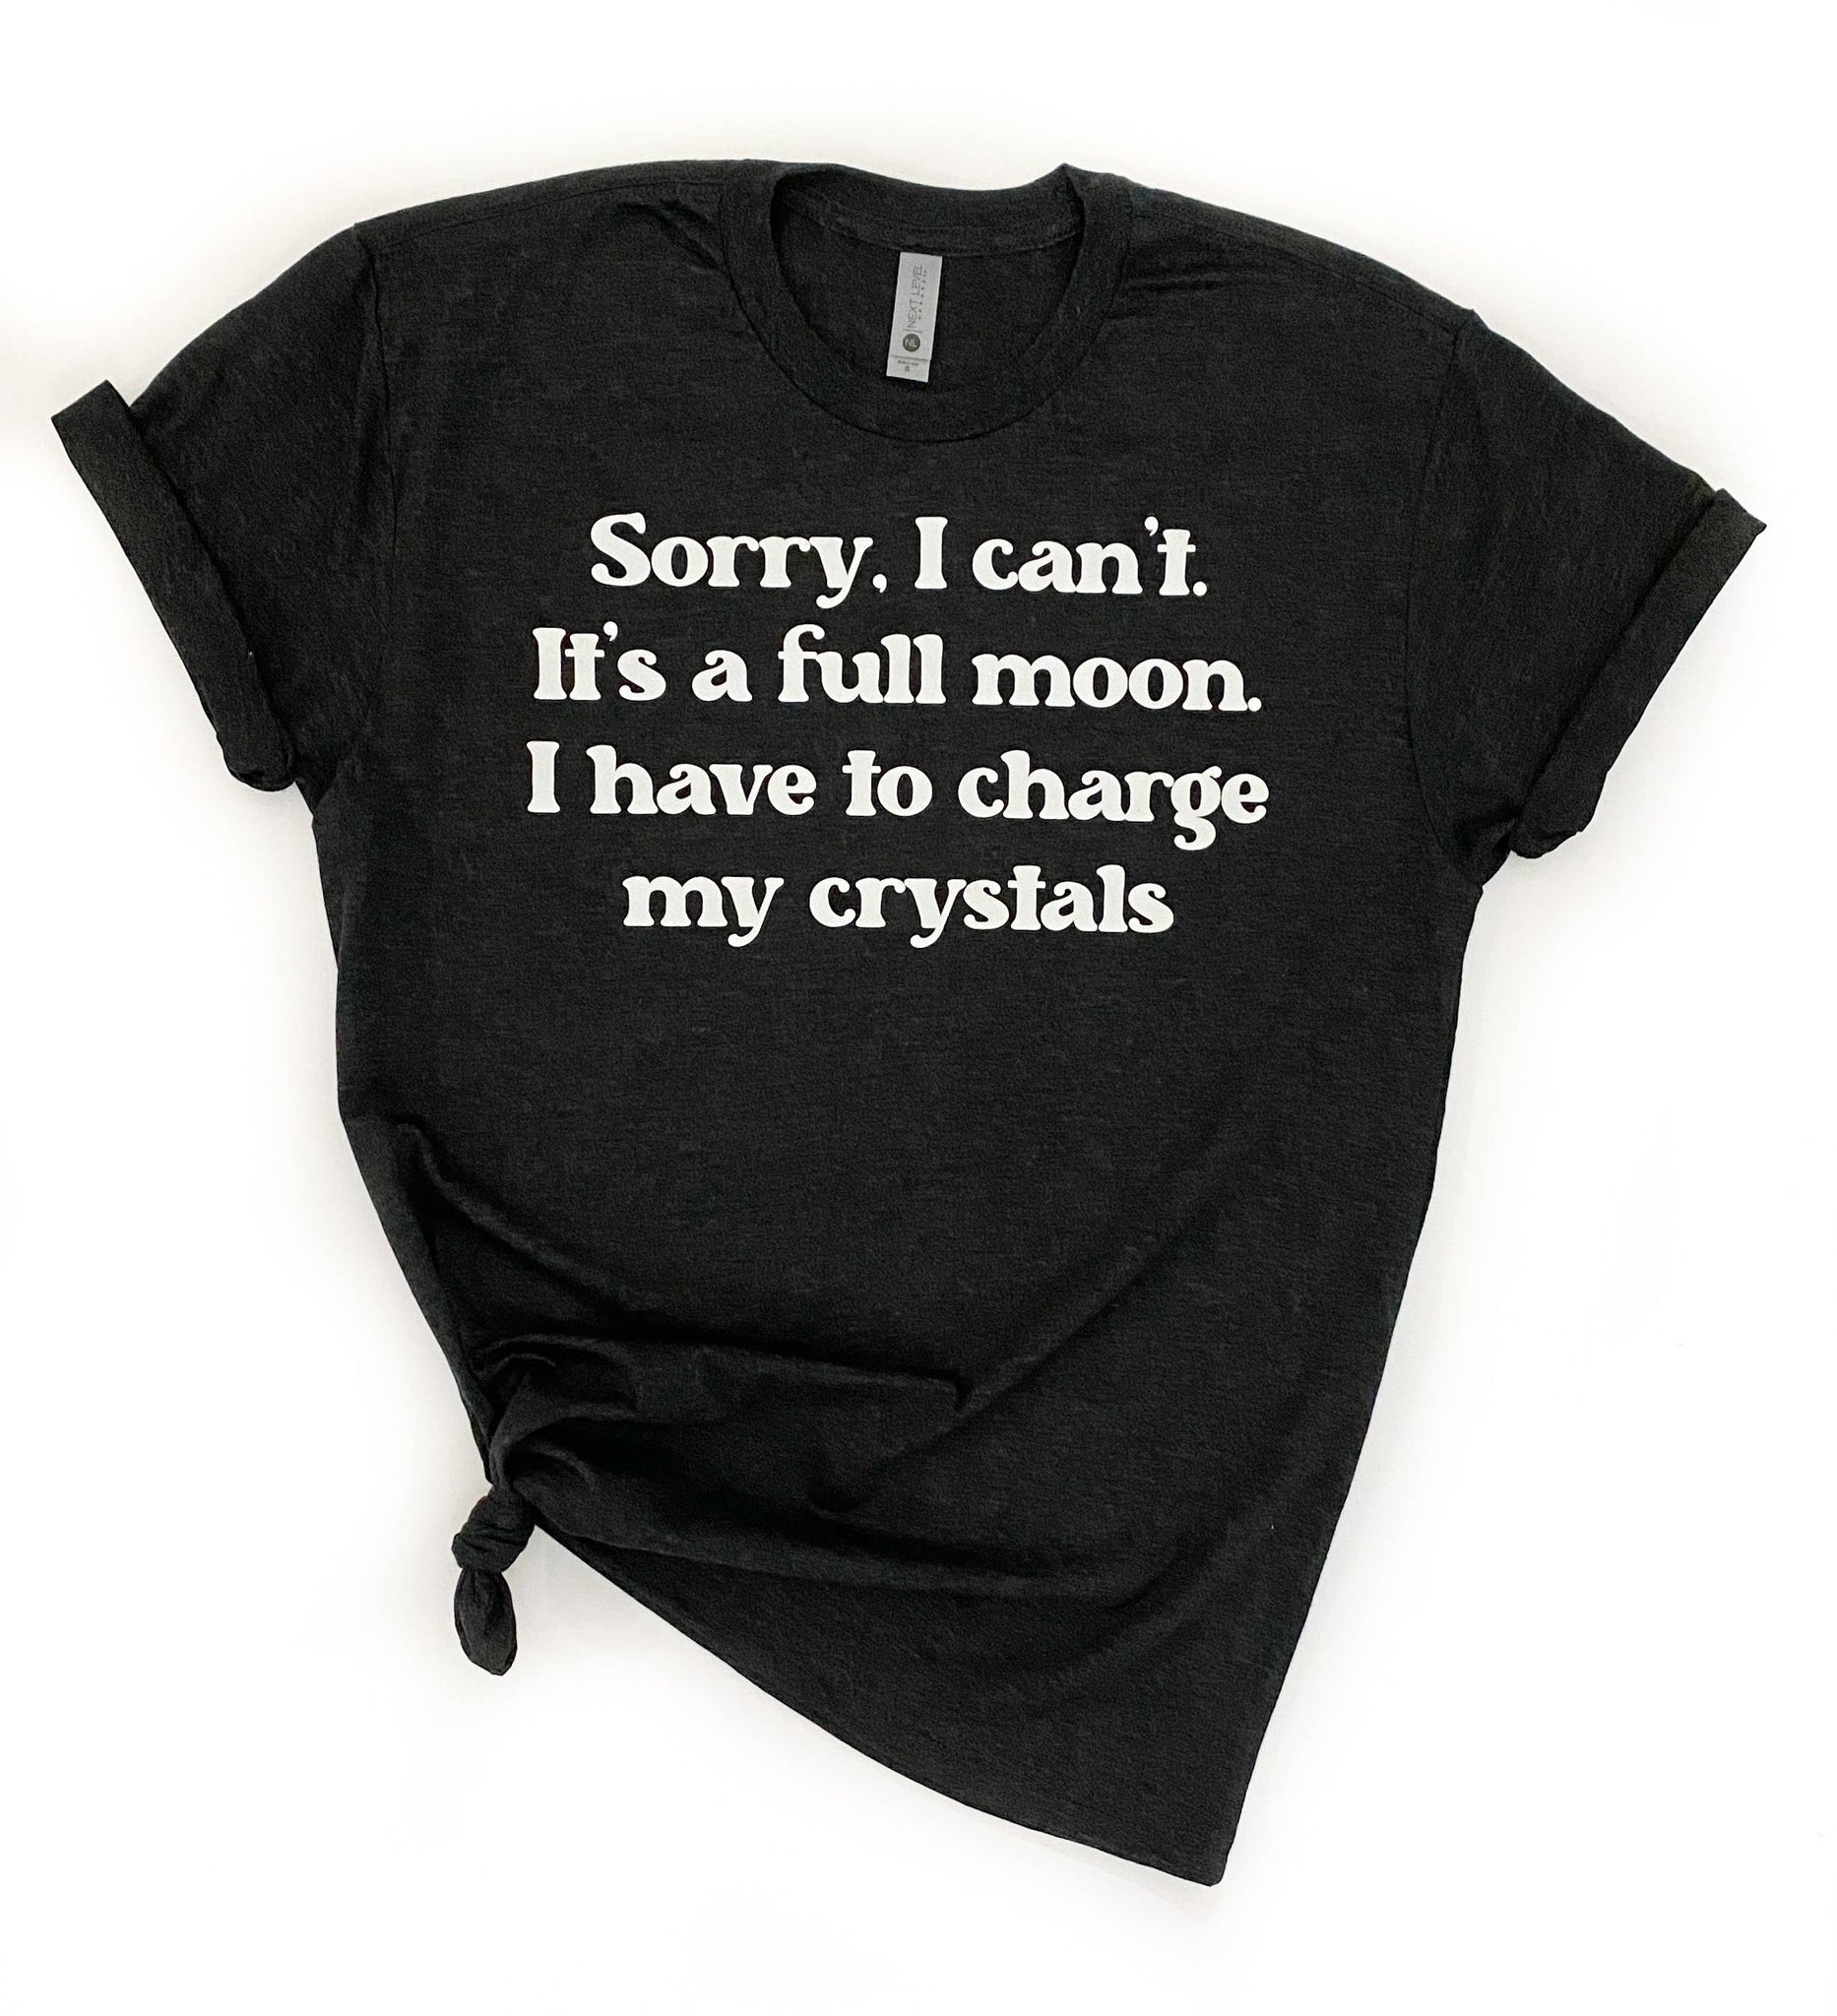 Have To Charge My Crystals Tee: Small